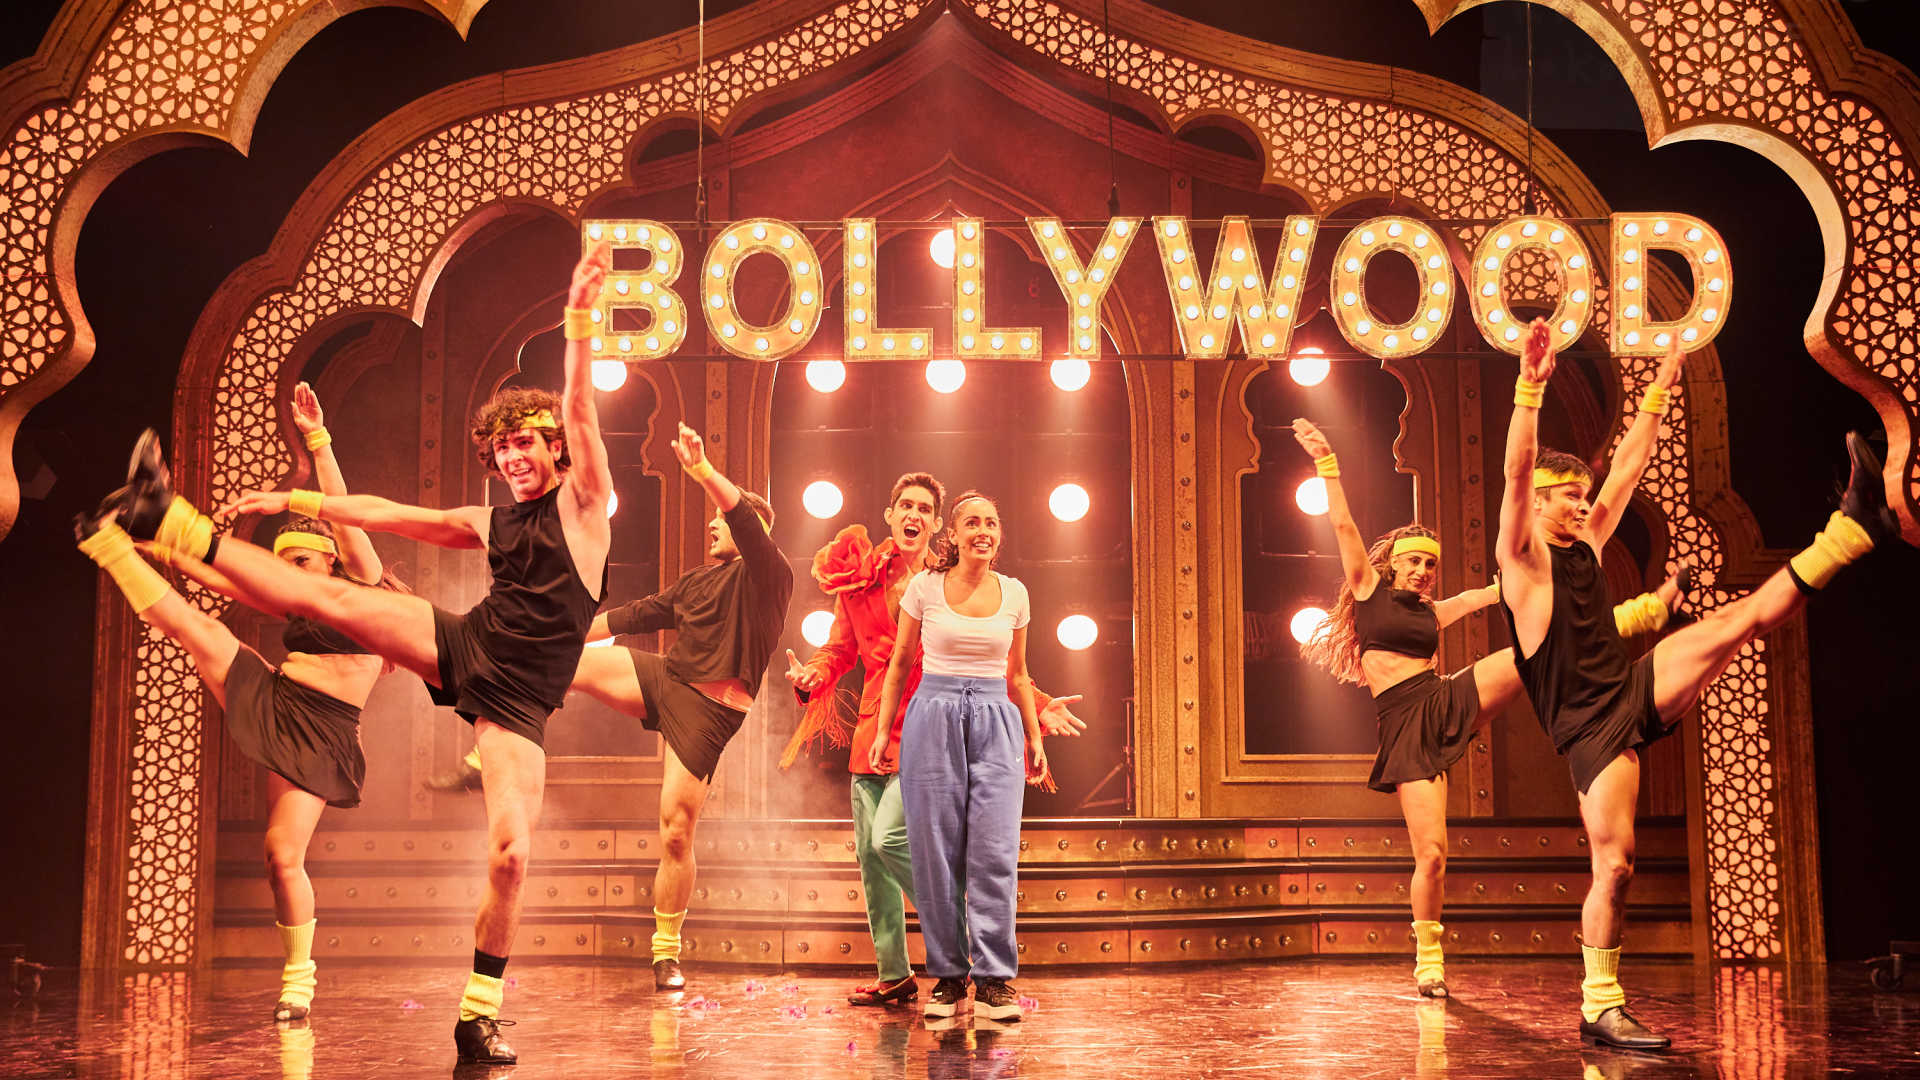 Frankie Goes To Bollywood